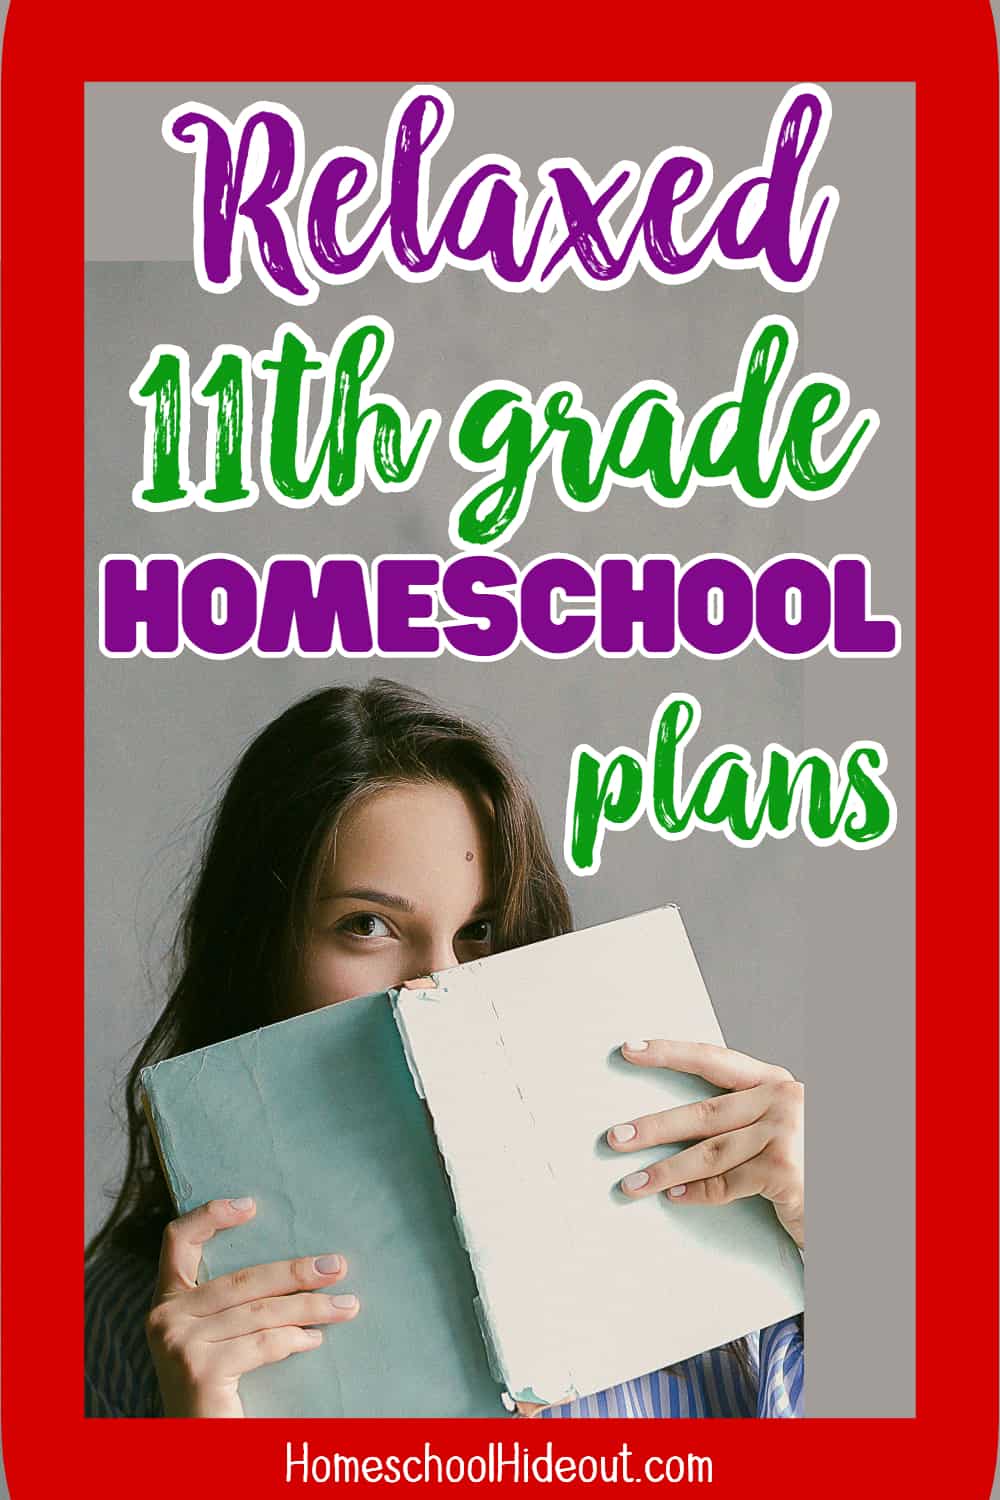 These 11th grade homeschool plans are perfect for relaxed learners who want to follow their child's passions!